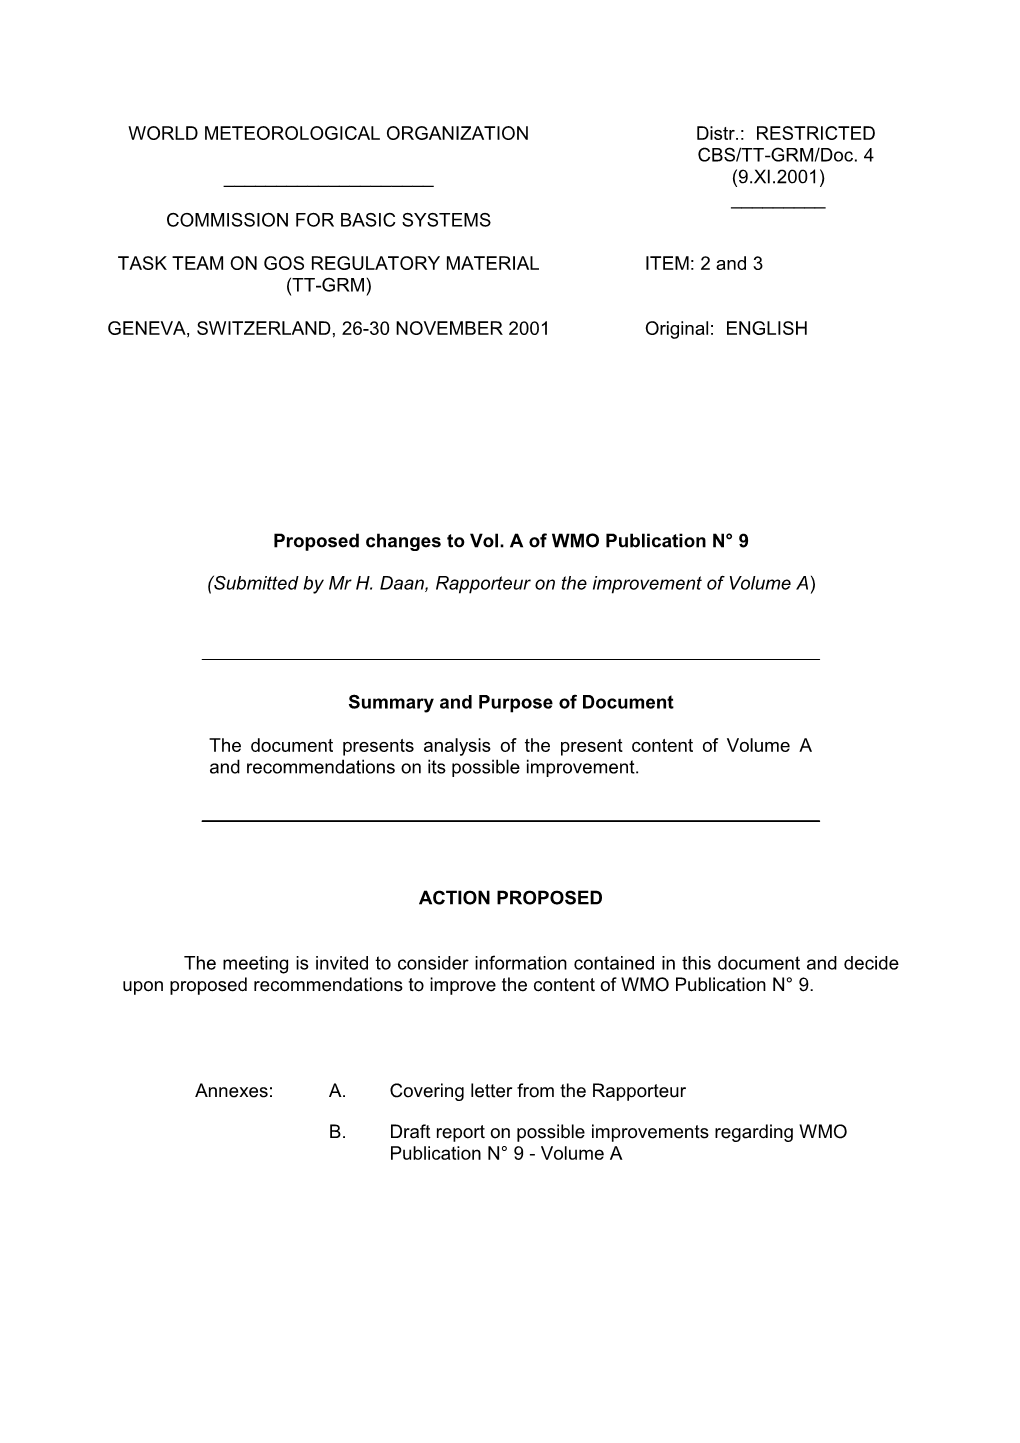 Proposed Changes to Vol. a of WMO Publication N 9